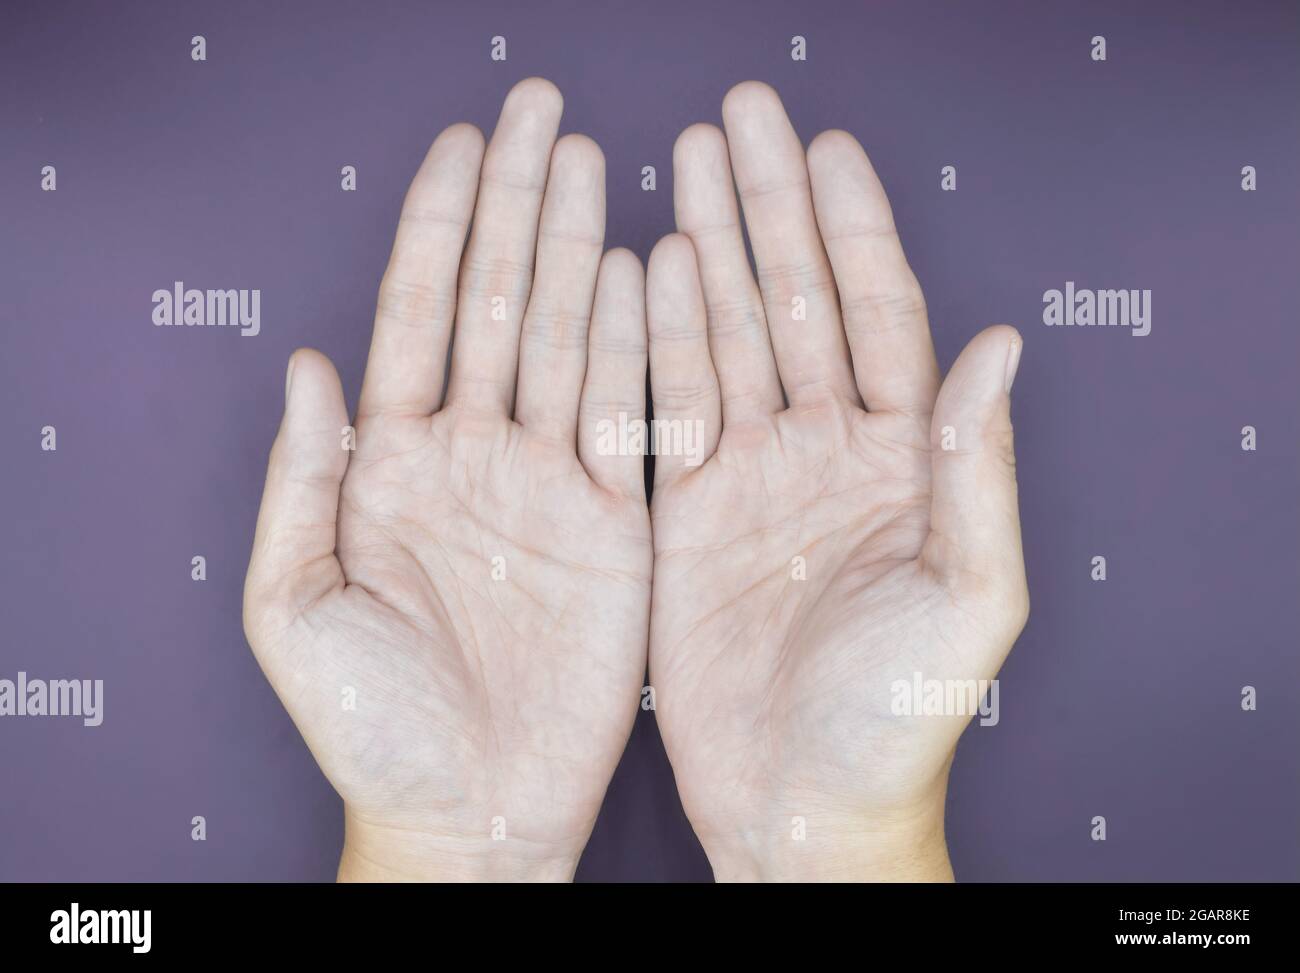 Pale palmar surface of both hands. Anaemic hands of Asian, Chinese man. Isolated on magenta background. Stock Photo